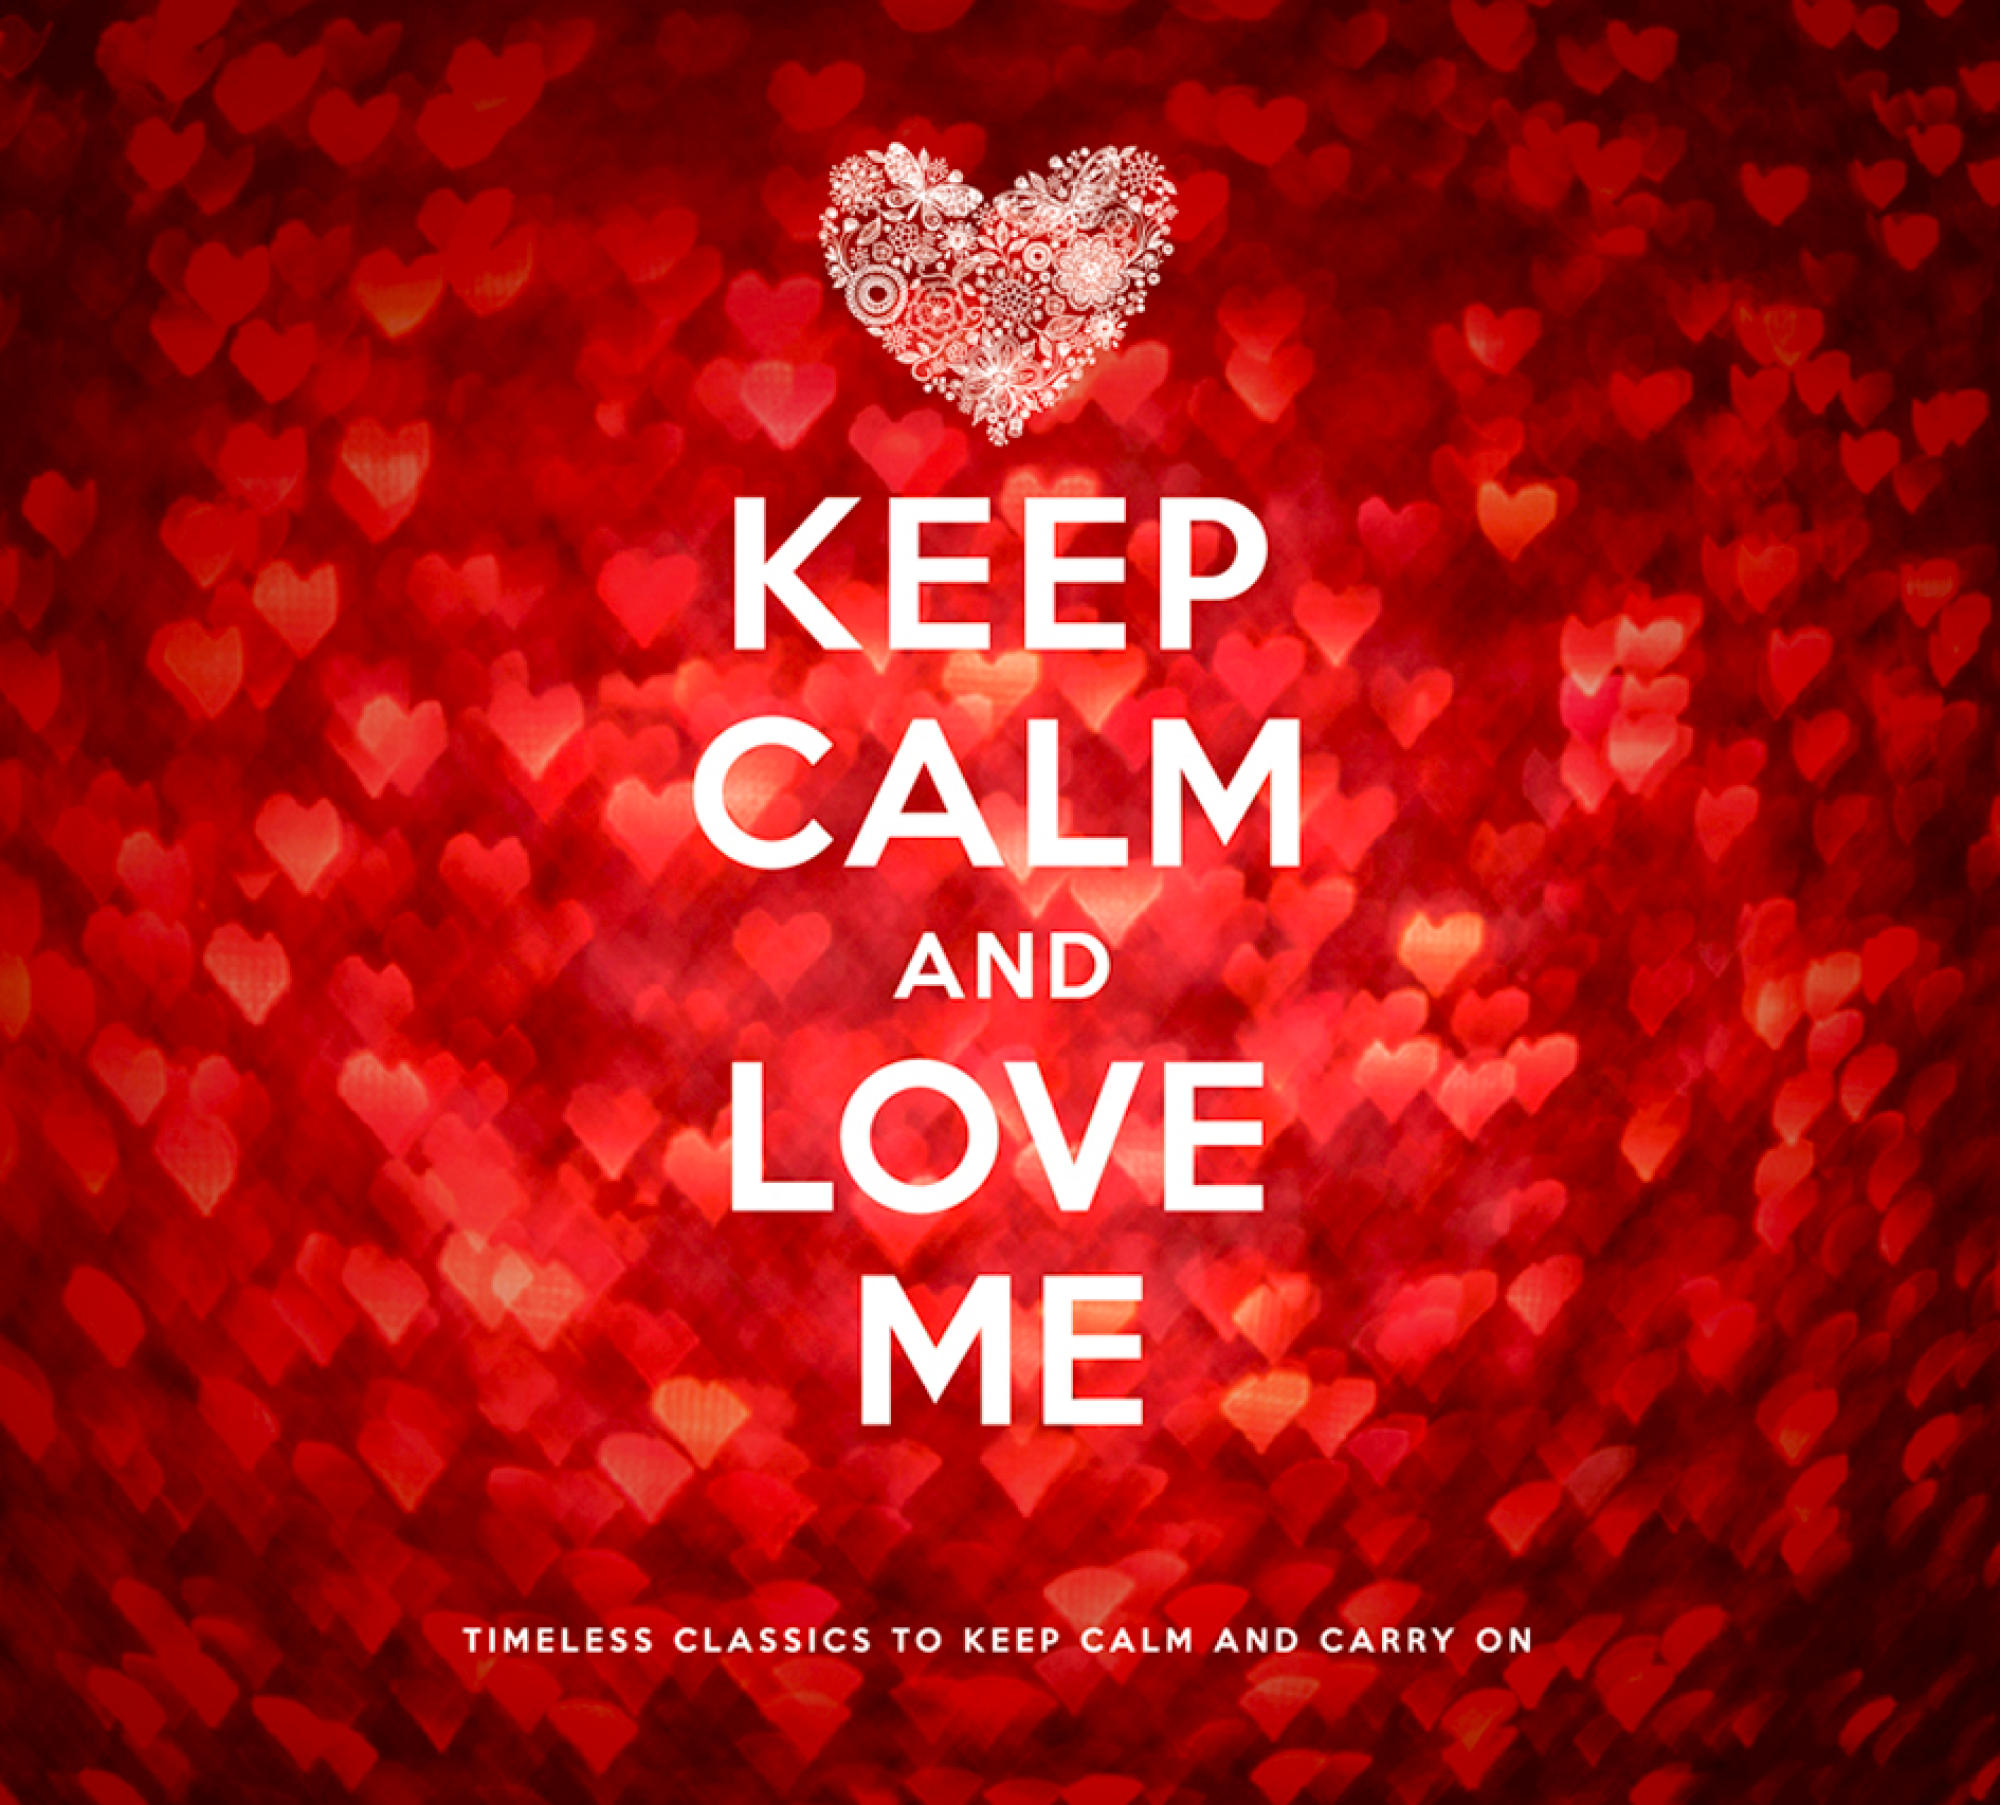 (CD) Me VARIOUS Calm - Love And Keep -